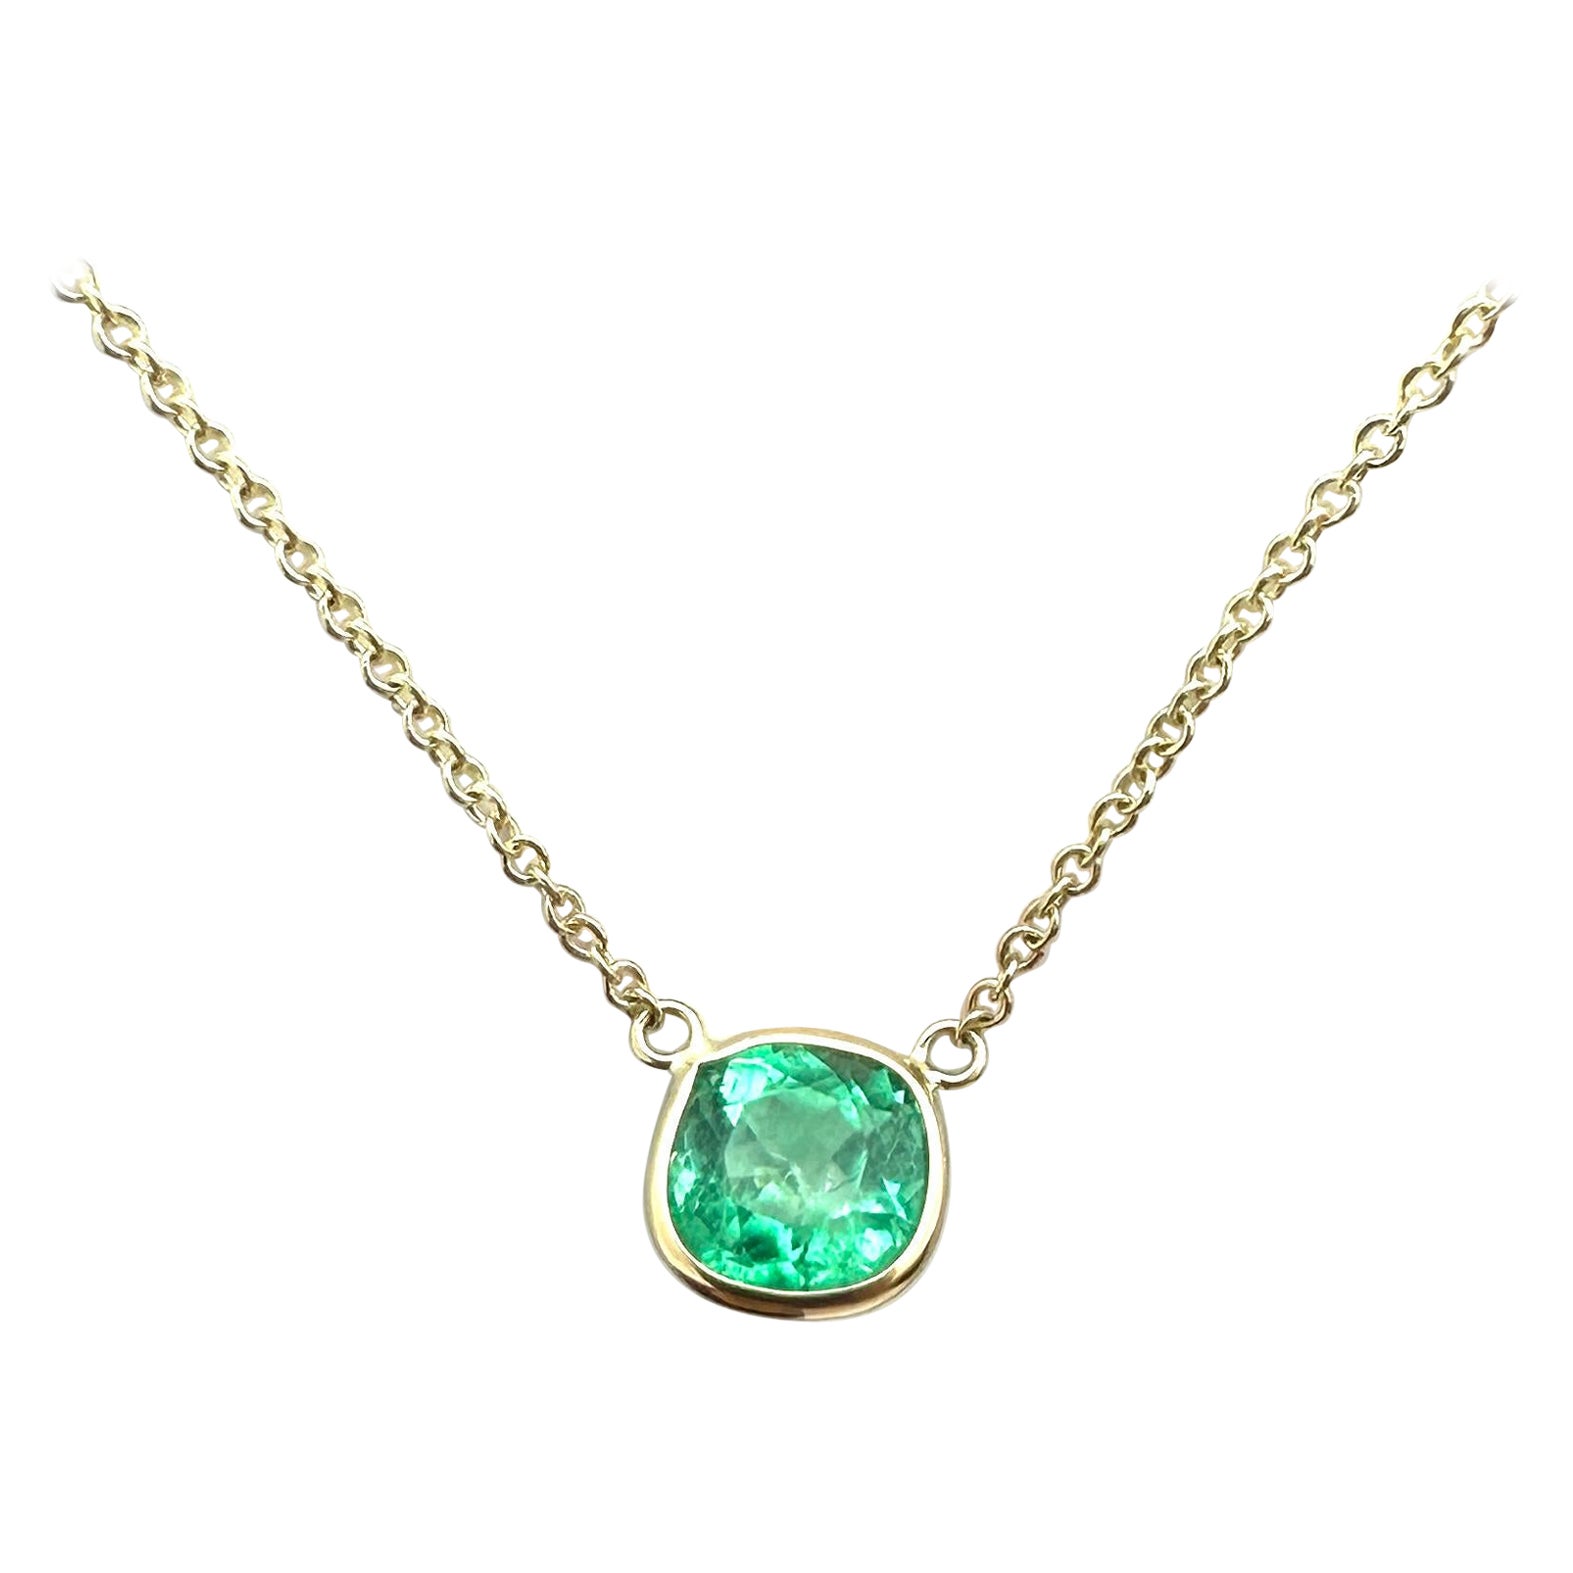 1.51 Carat Weight Green Emerald Cushion Cut Solitaire Necklace in 14k YG